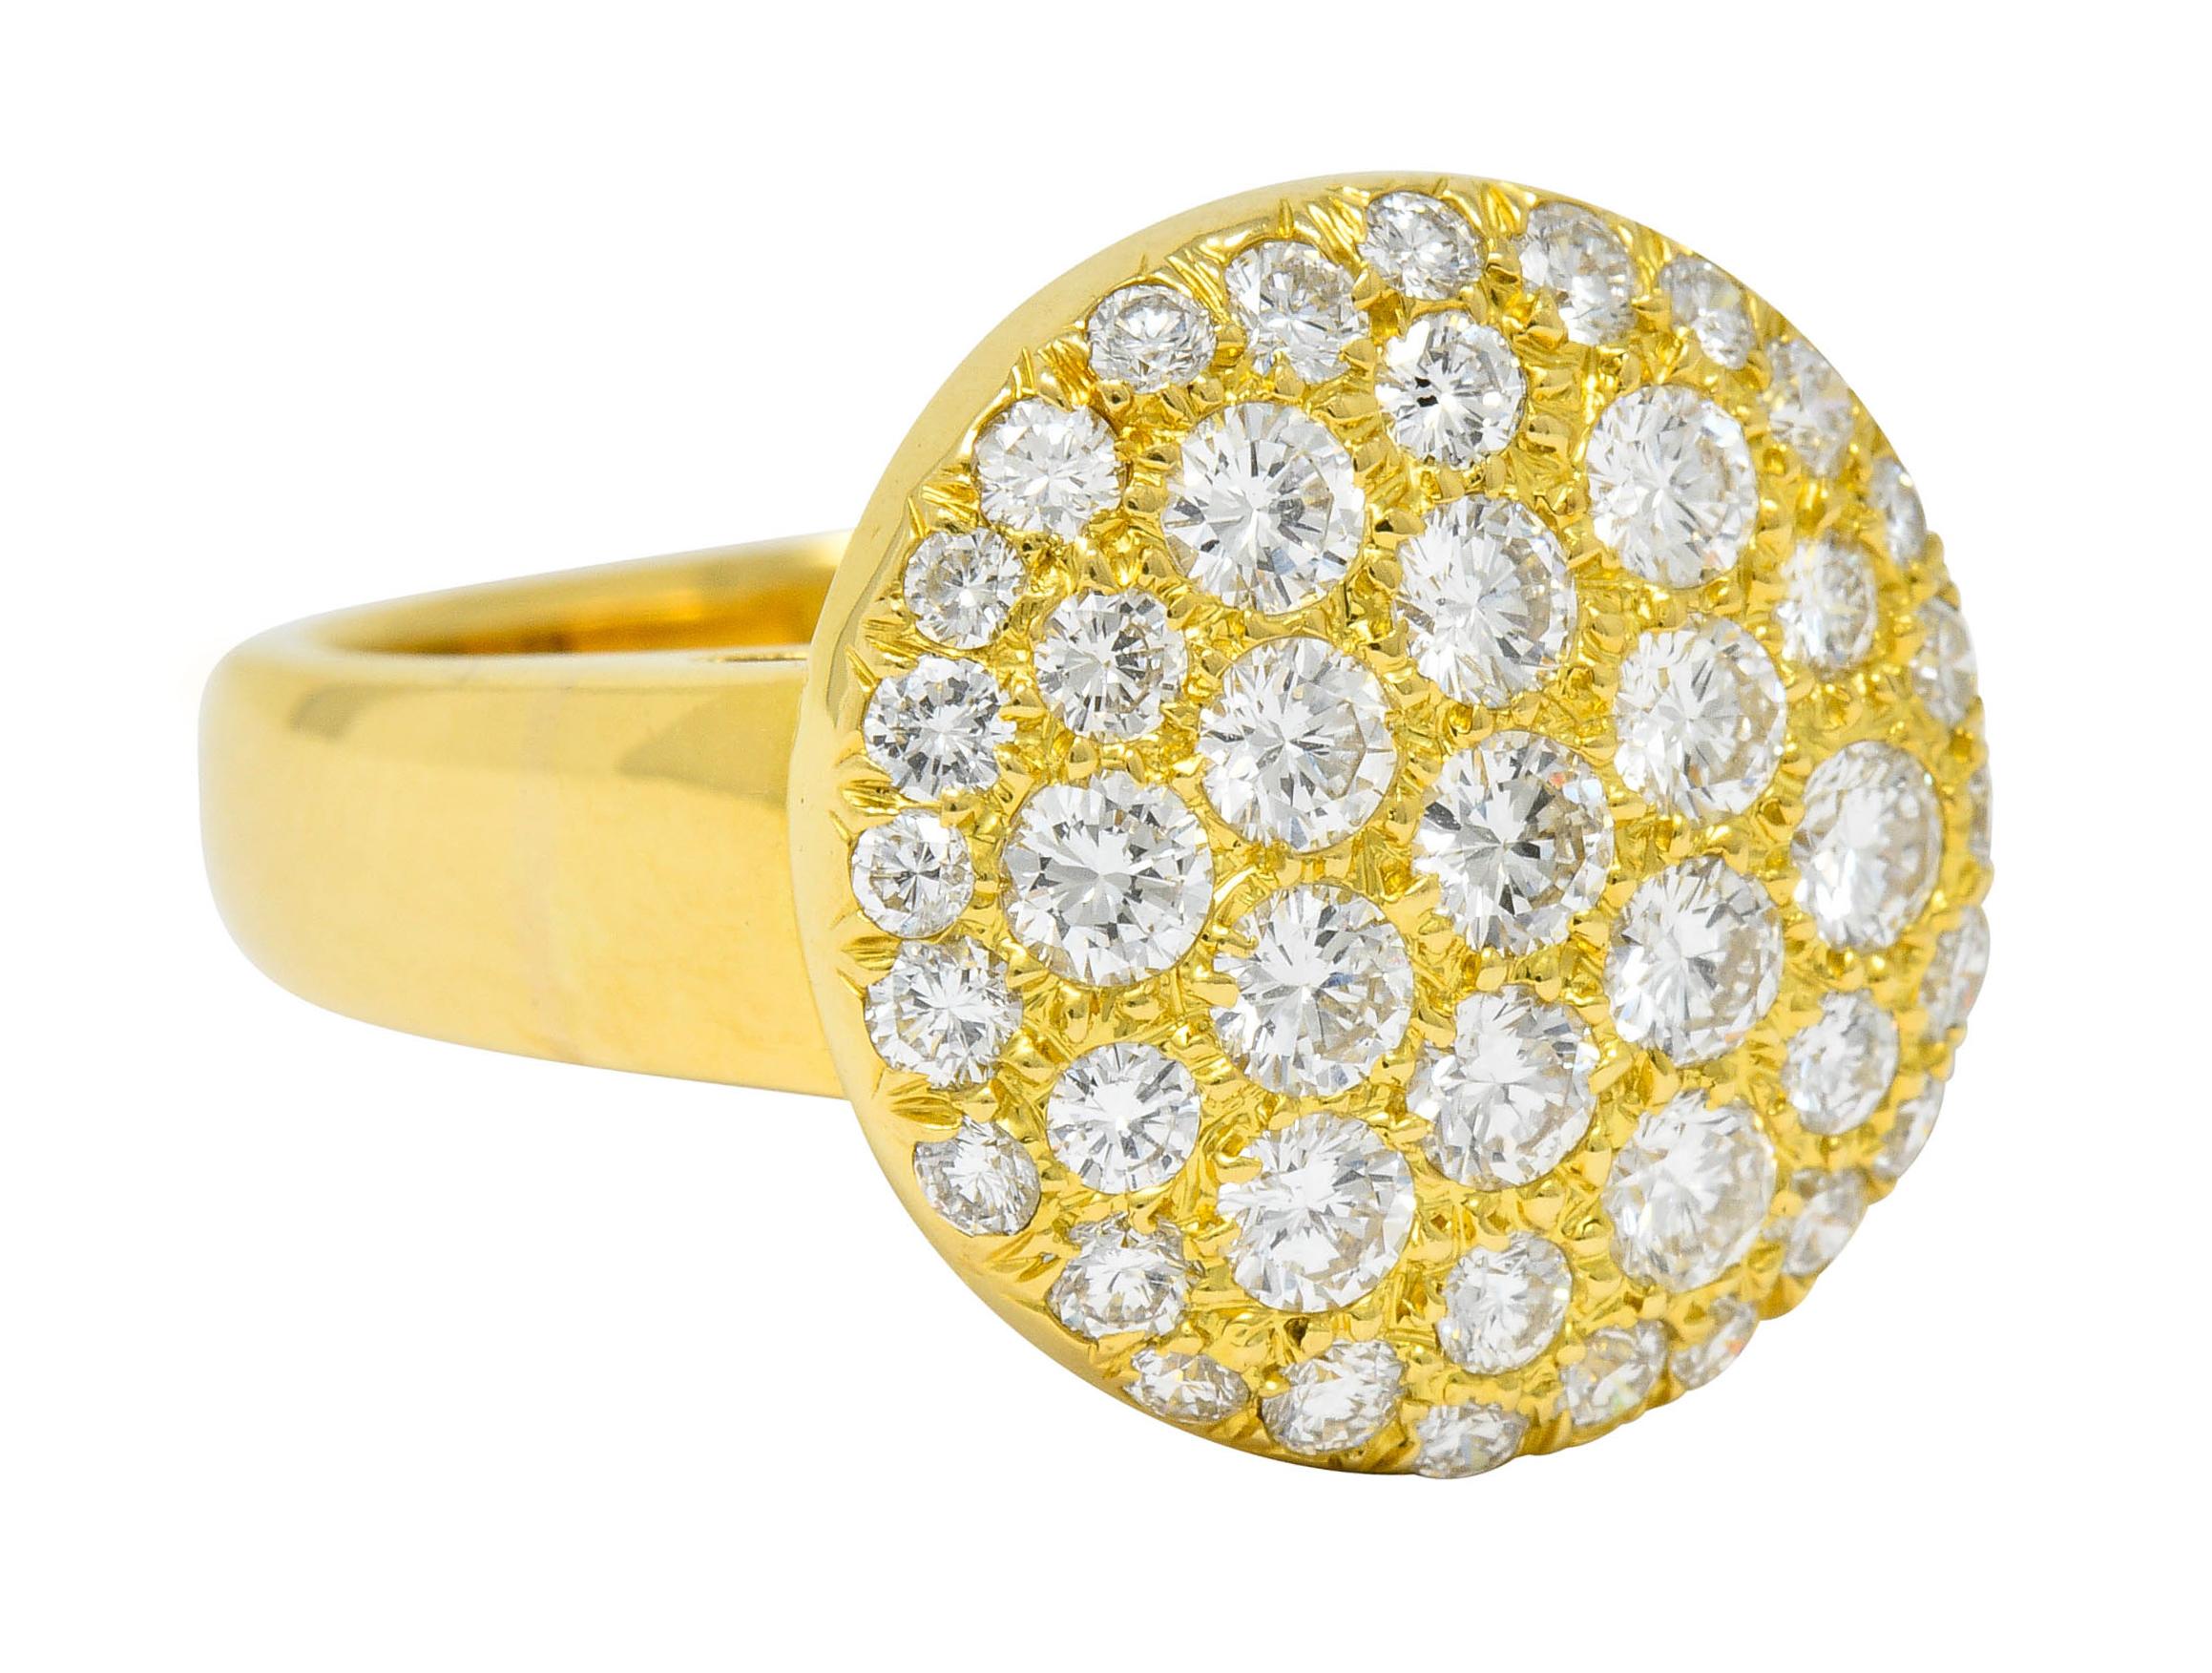 Ring is designed as a circular form pavé set with round brilliant cut diamonds

Weighing in total approximately 1.50 carats with G/H color and VS clarity

Numbered and signed VCA for Van Cleef & Arpels

Stamped 18K for 18 karat gold

Circa: